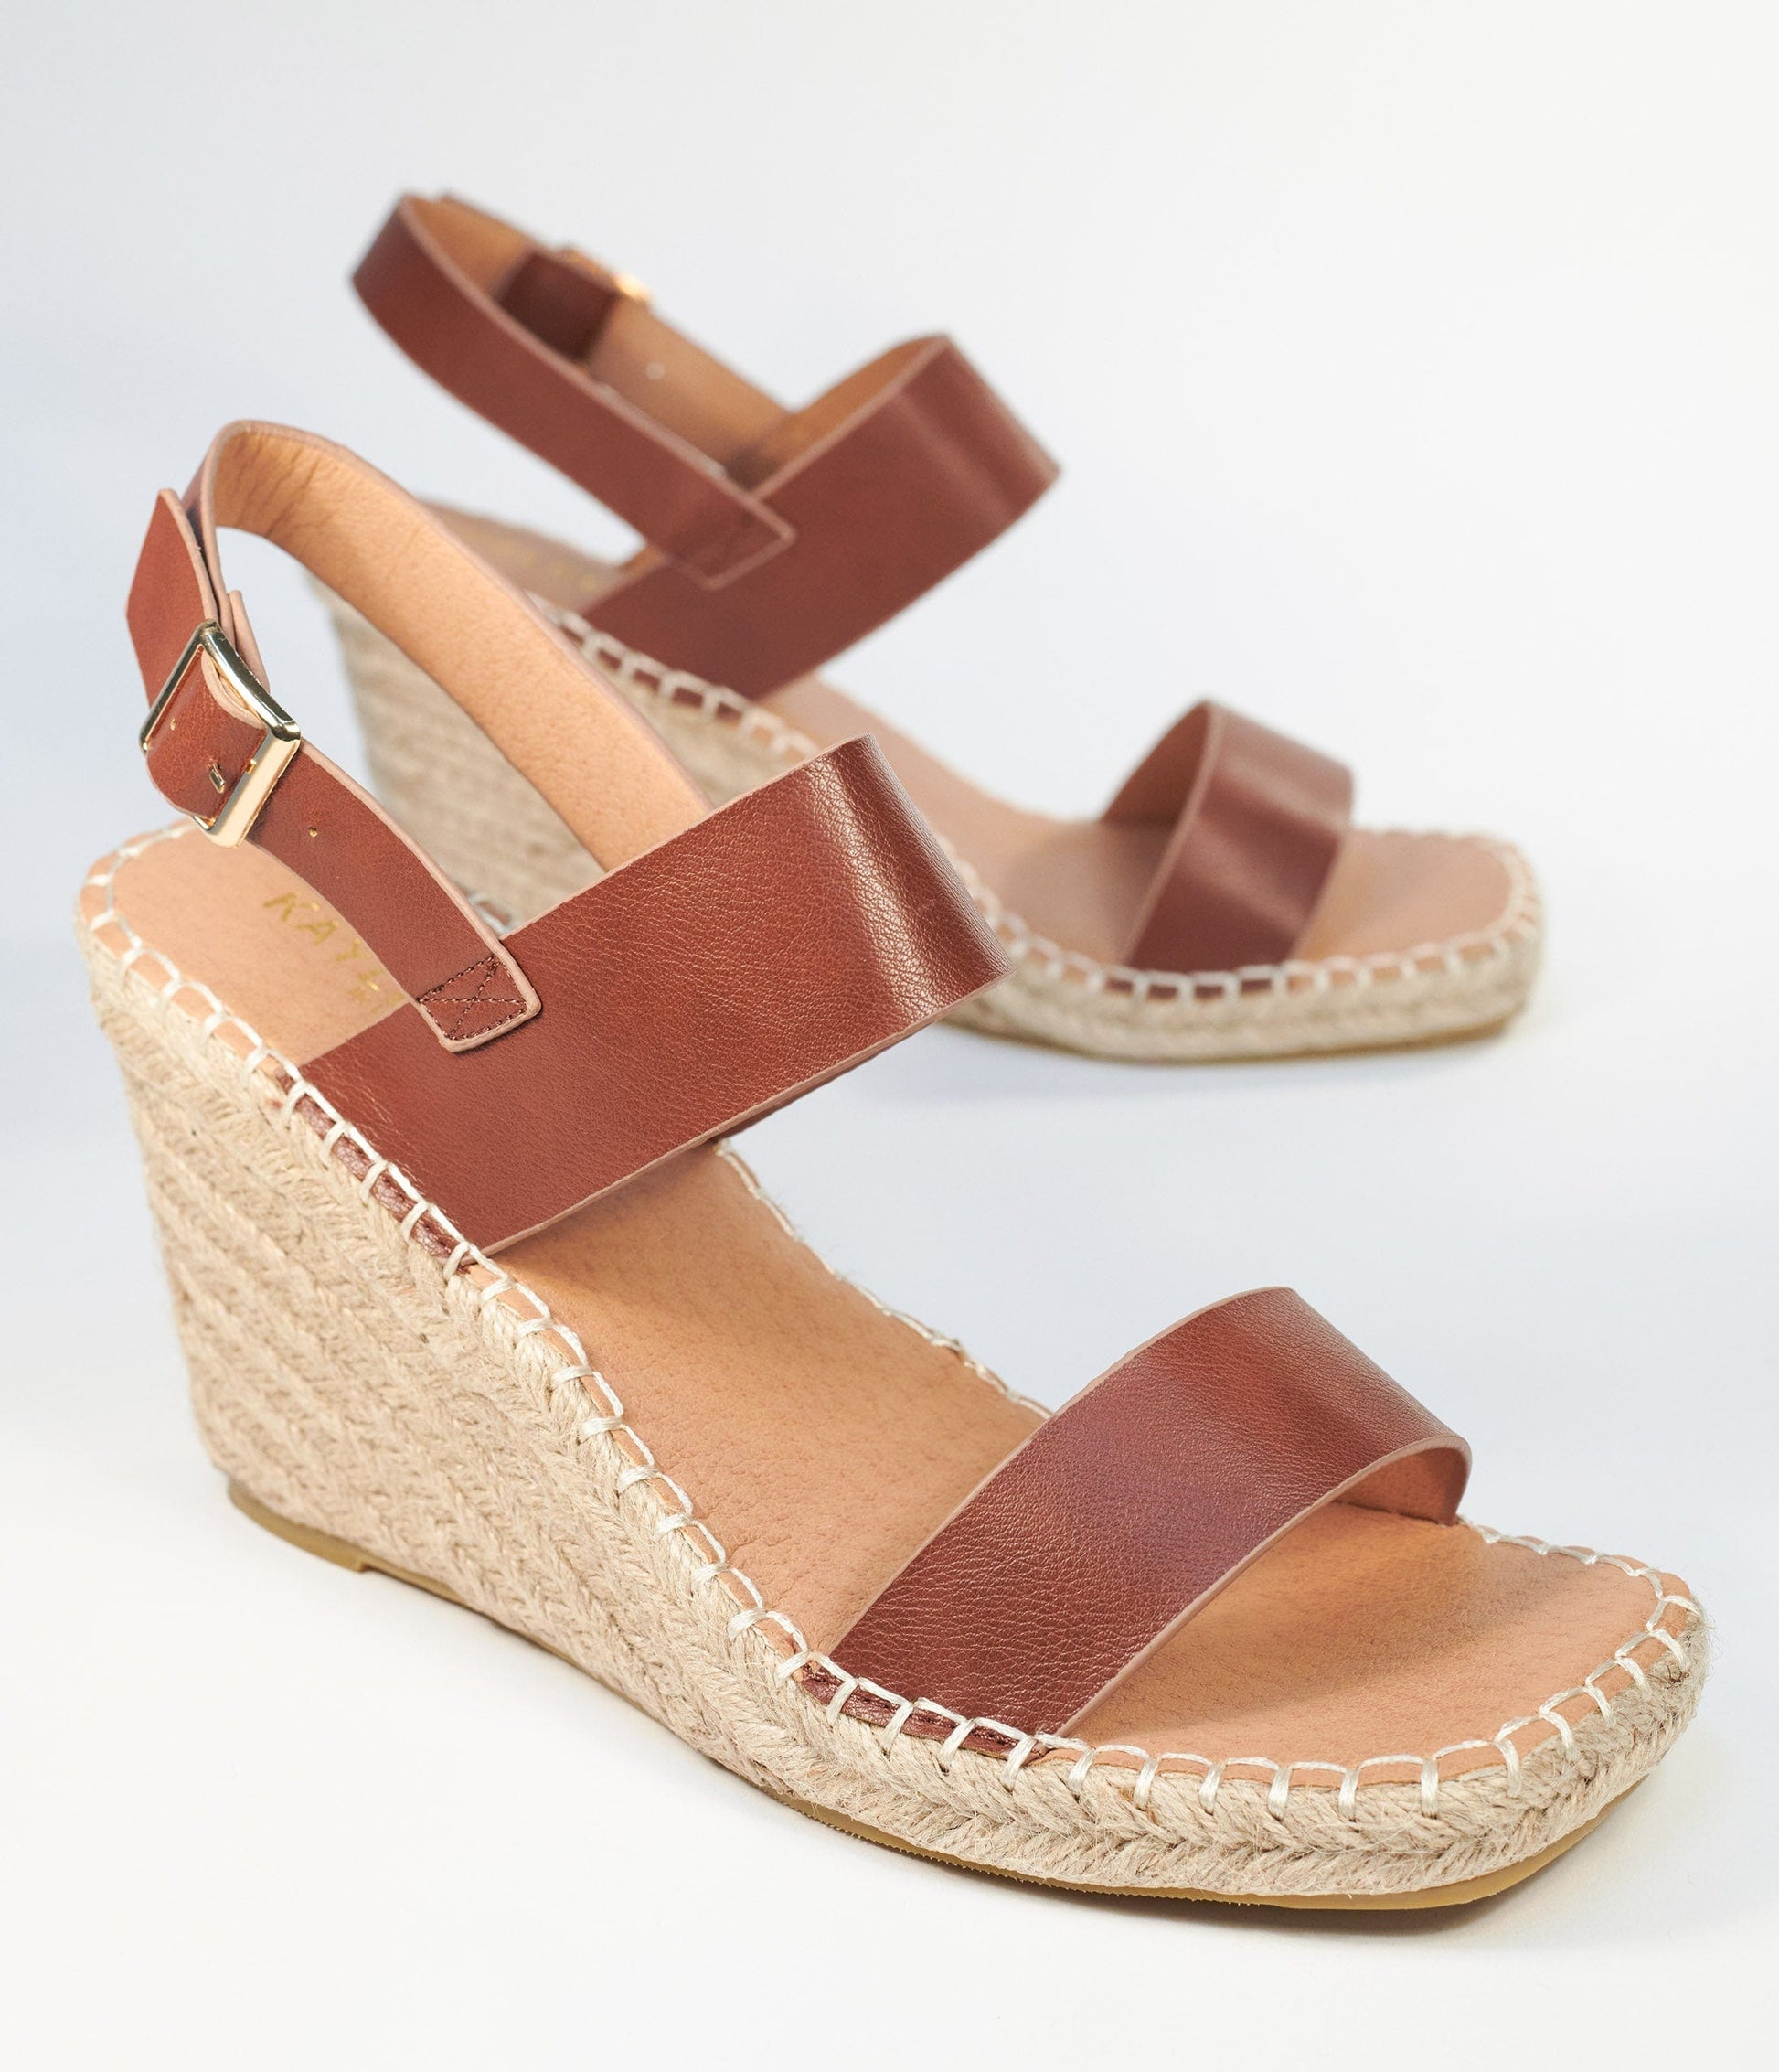 Brown Leatherette Espadrille Wedge Sandals